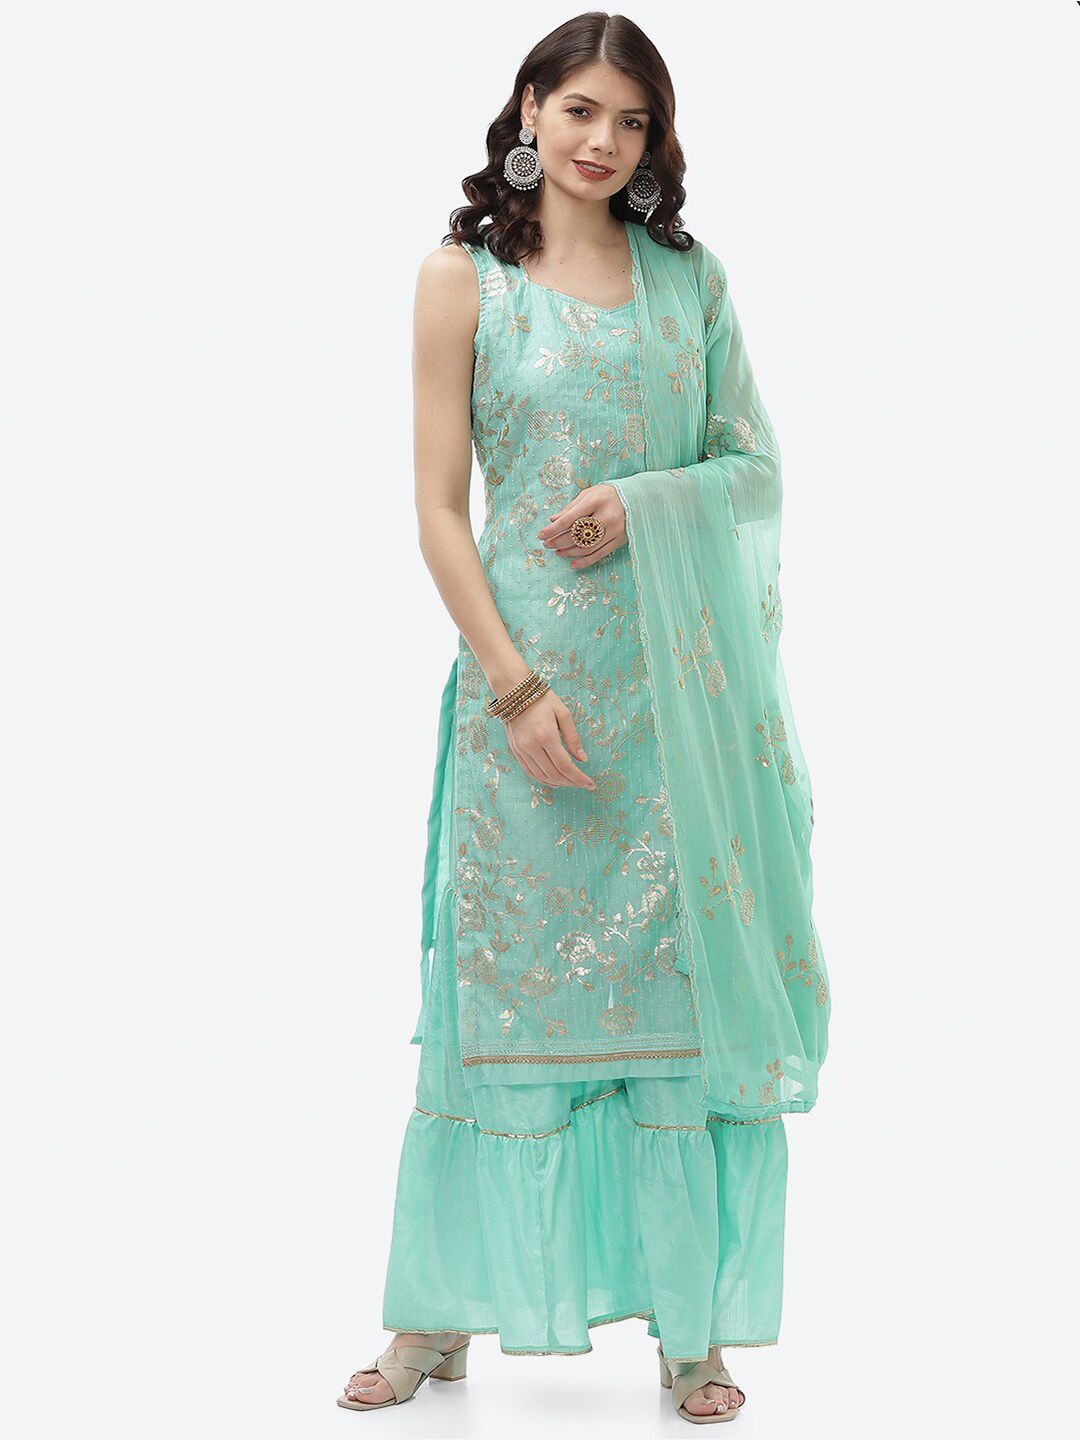 Biba Turquoise Blue & Gold-Toned Printed Unstitched Dress Material Price in India